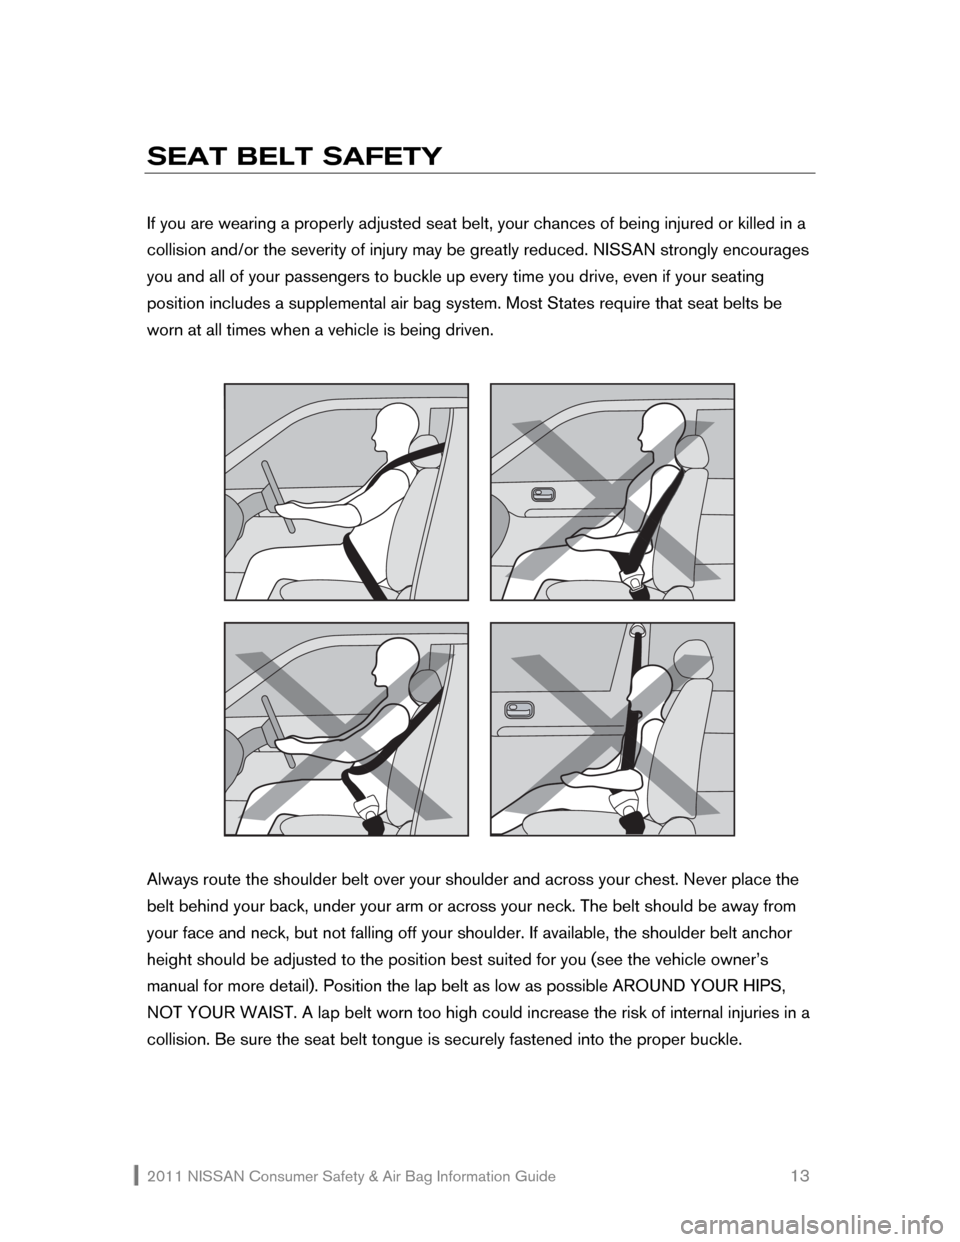 NISSAN XTERRA 2011 N50 / 2.G Consumer Safety Air Bag Information Guide 2011 NISSAN Consumer Safety & Air Bag Information Guide                                                       13 
SEAT BELT SAFETY 
 
If you are wearing a properly adjusted seat belt, your chances of 